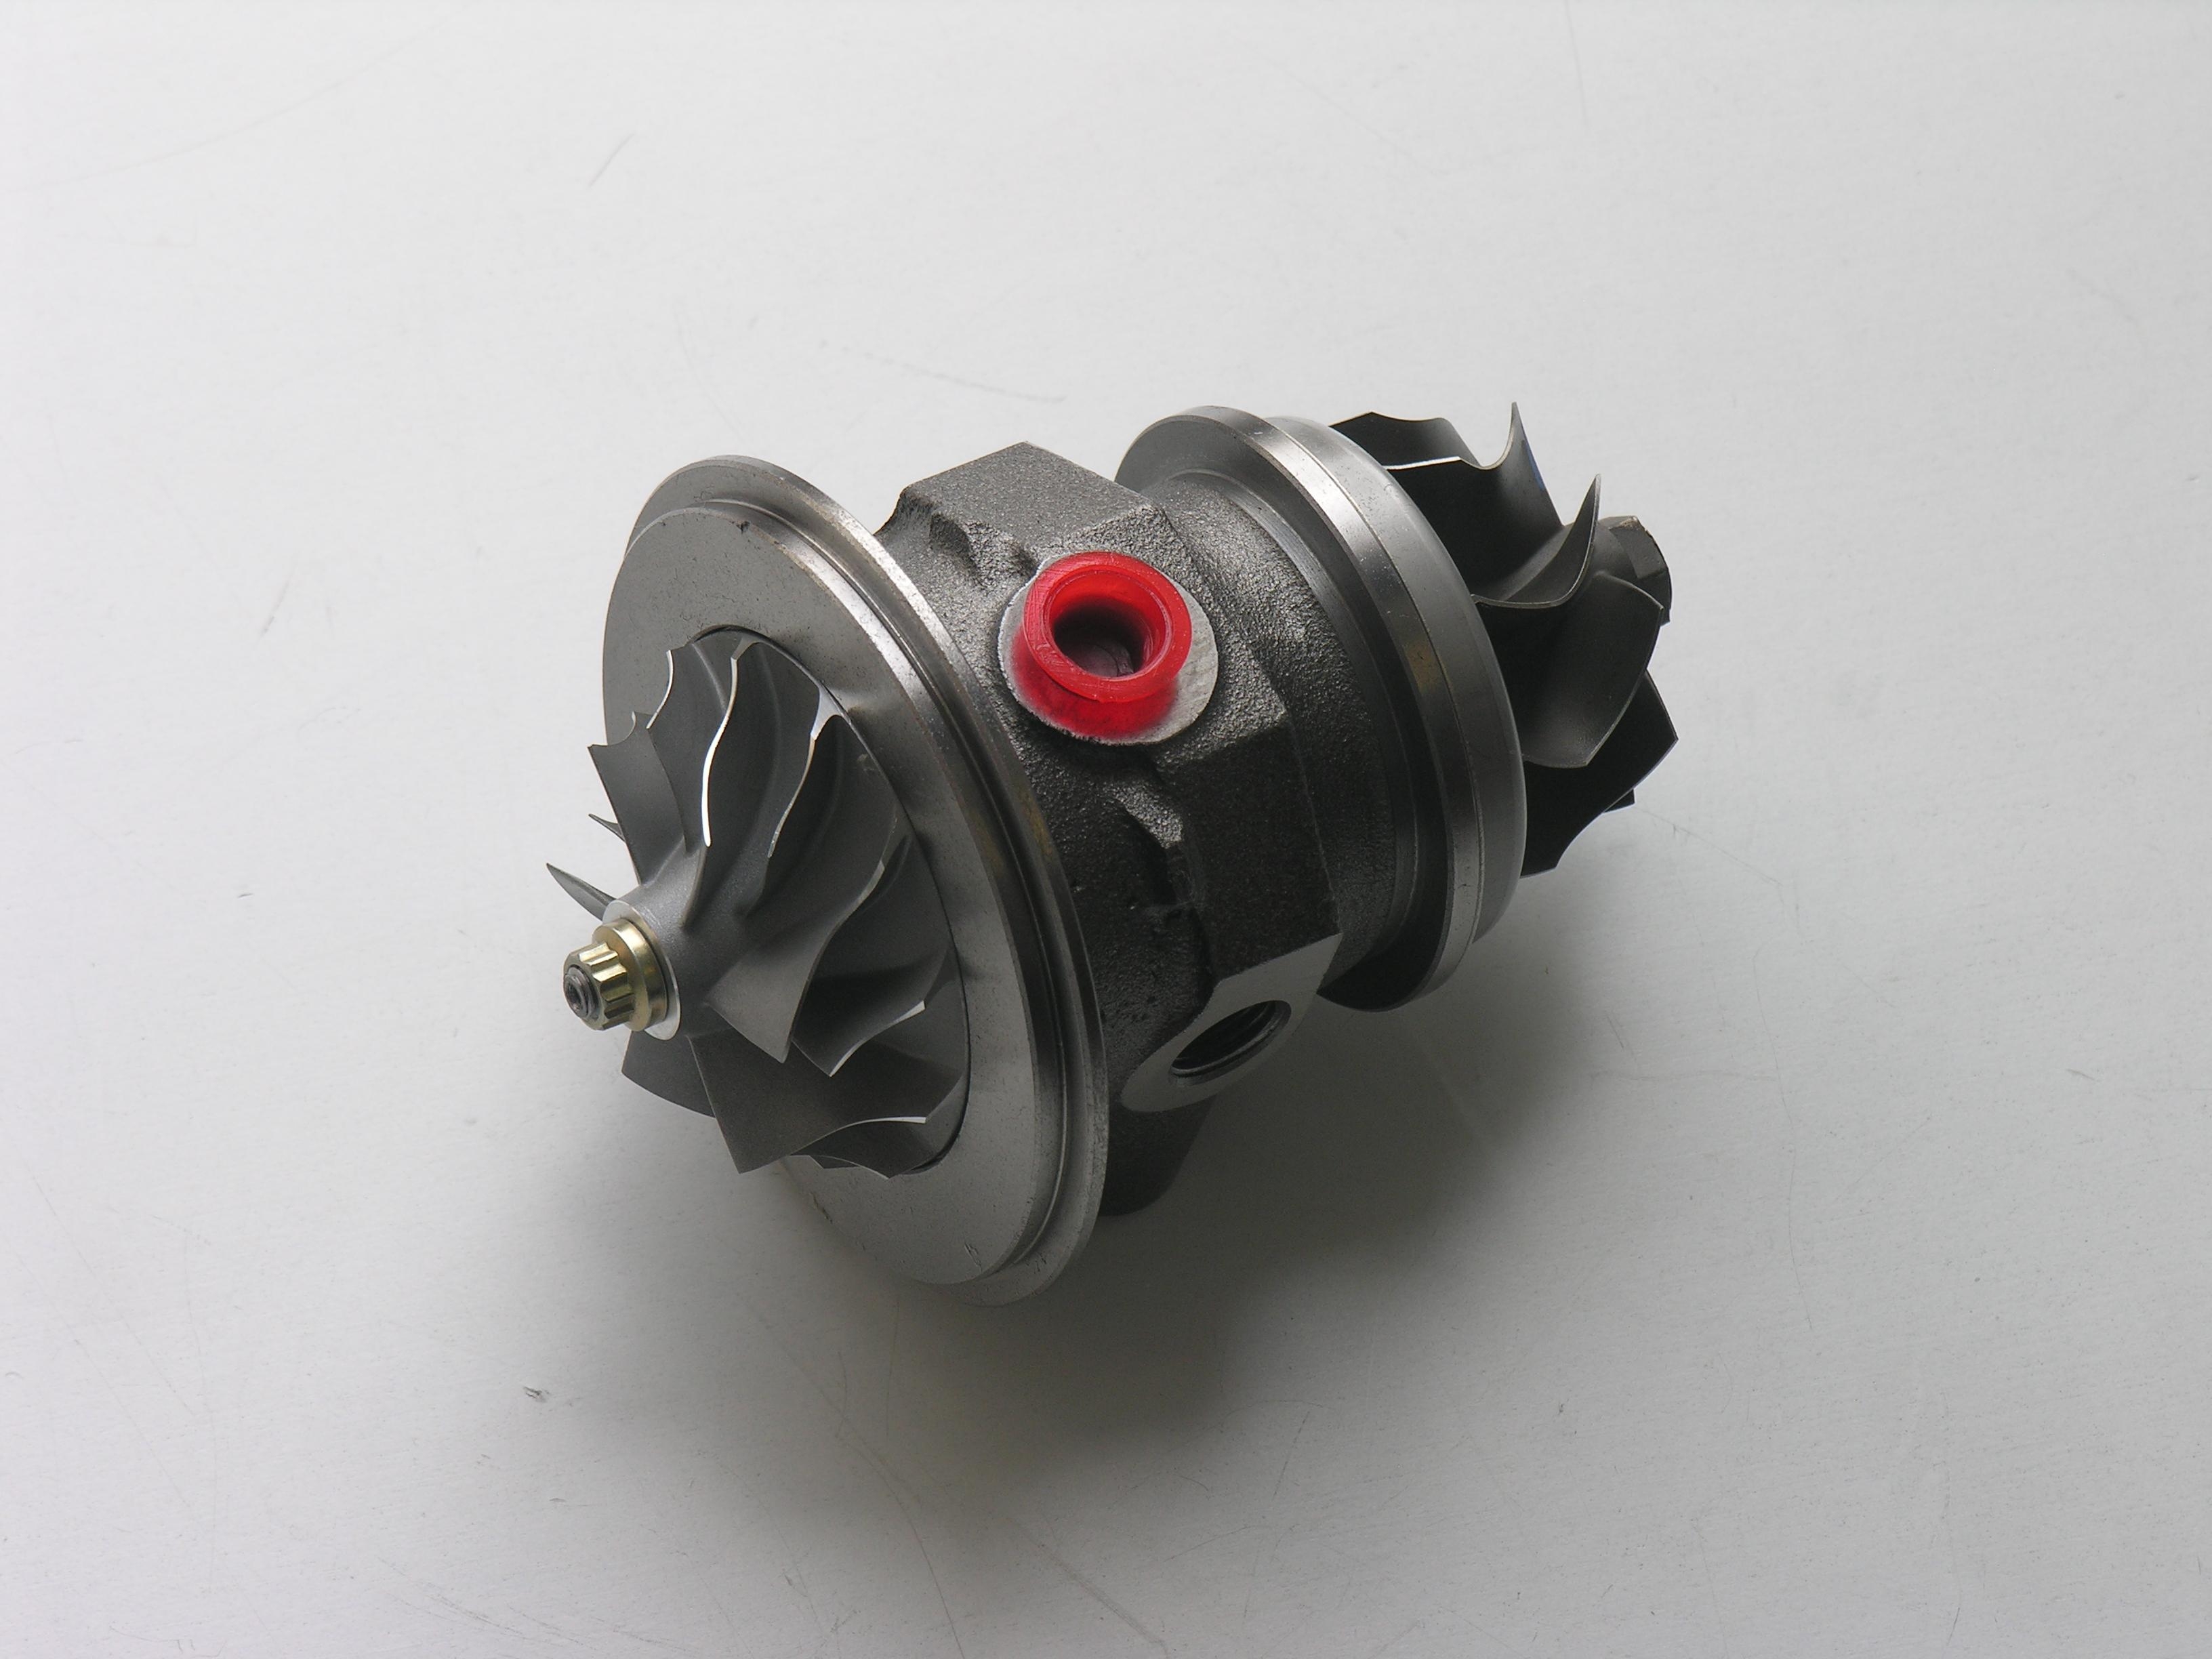 Cartridge for turbo charger Peugeot 207, 308 1.6 Turbo EP6 DTS